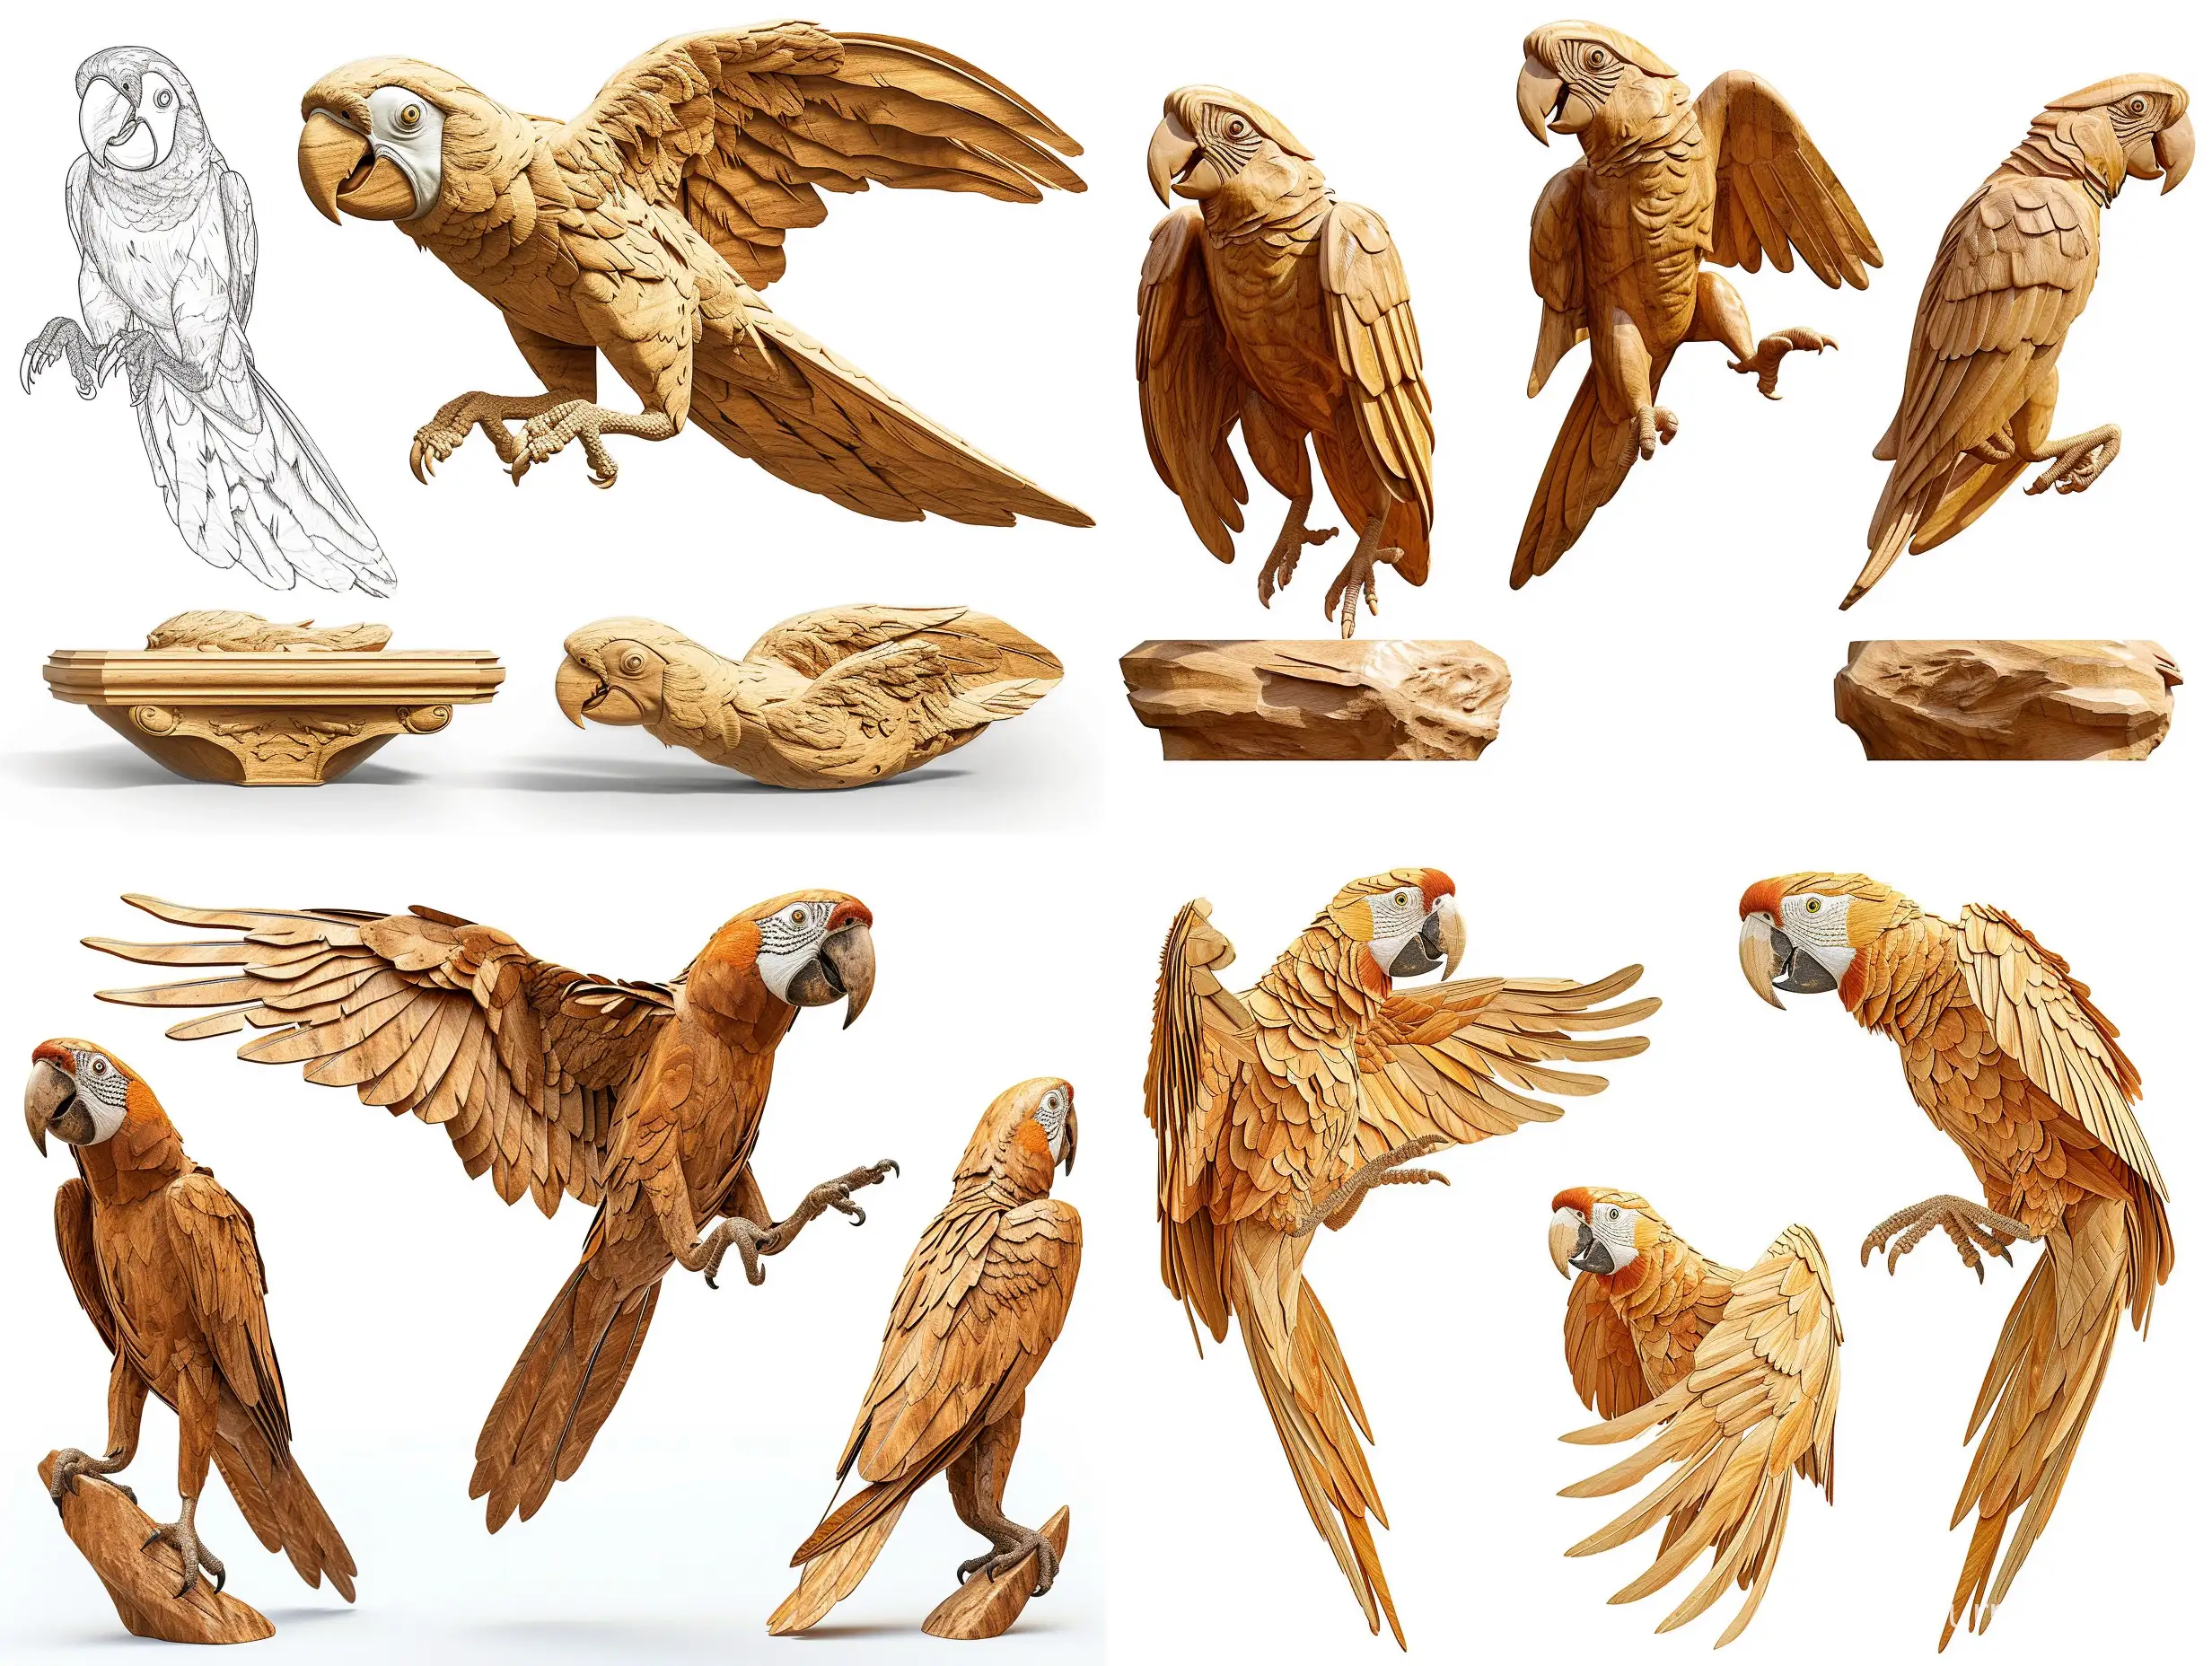 Realistic-Wooden-Parrot-Sculpture-Jumping-in-Dynamic-Poses